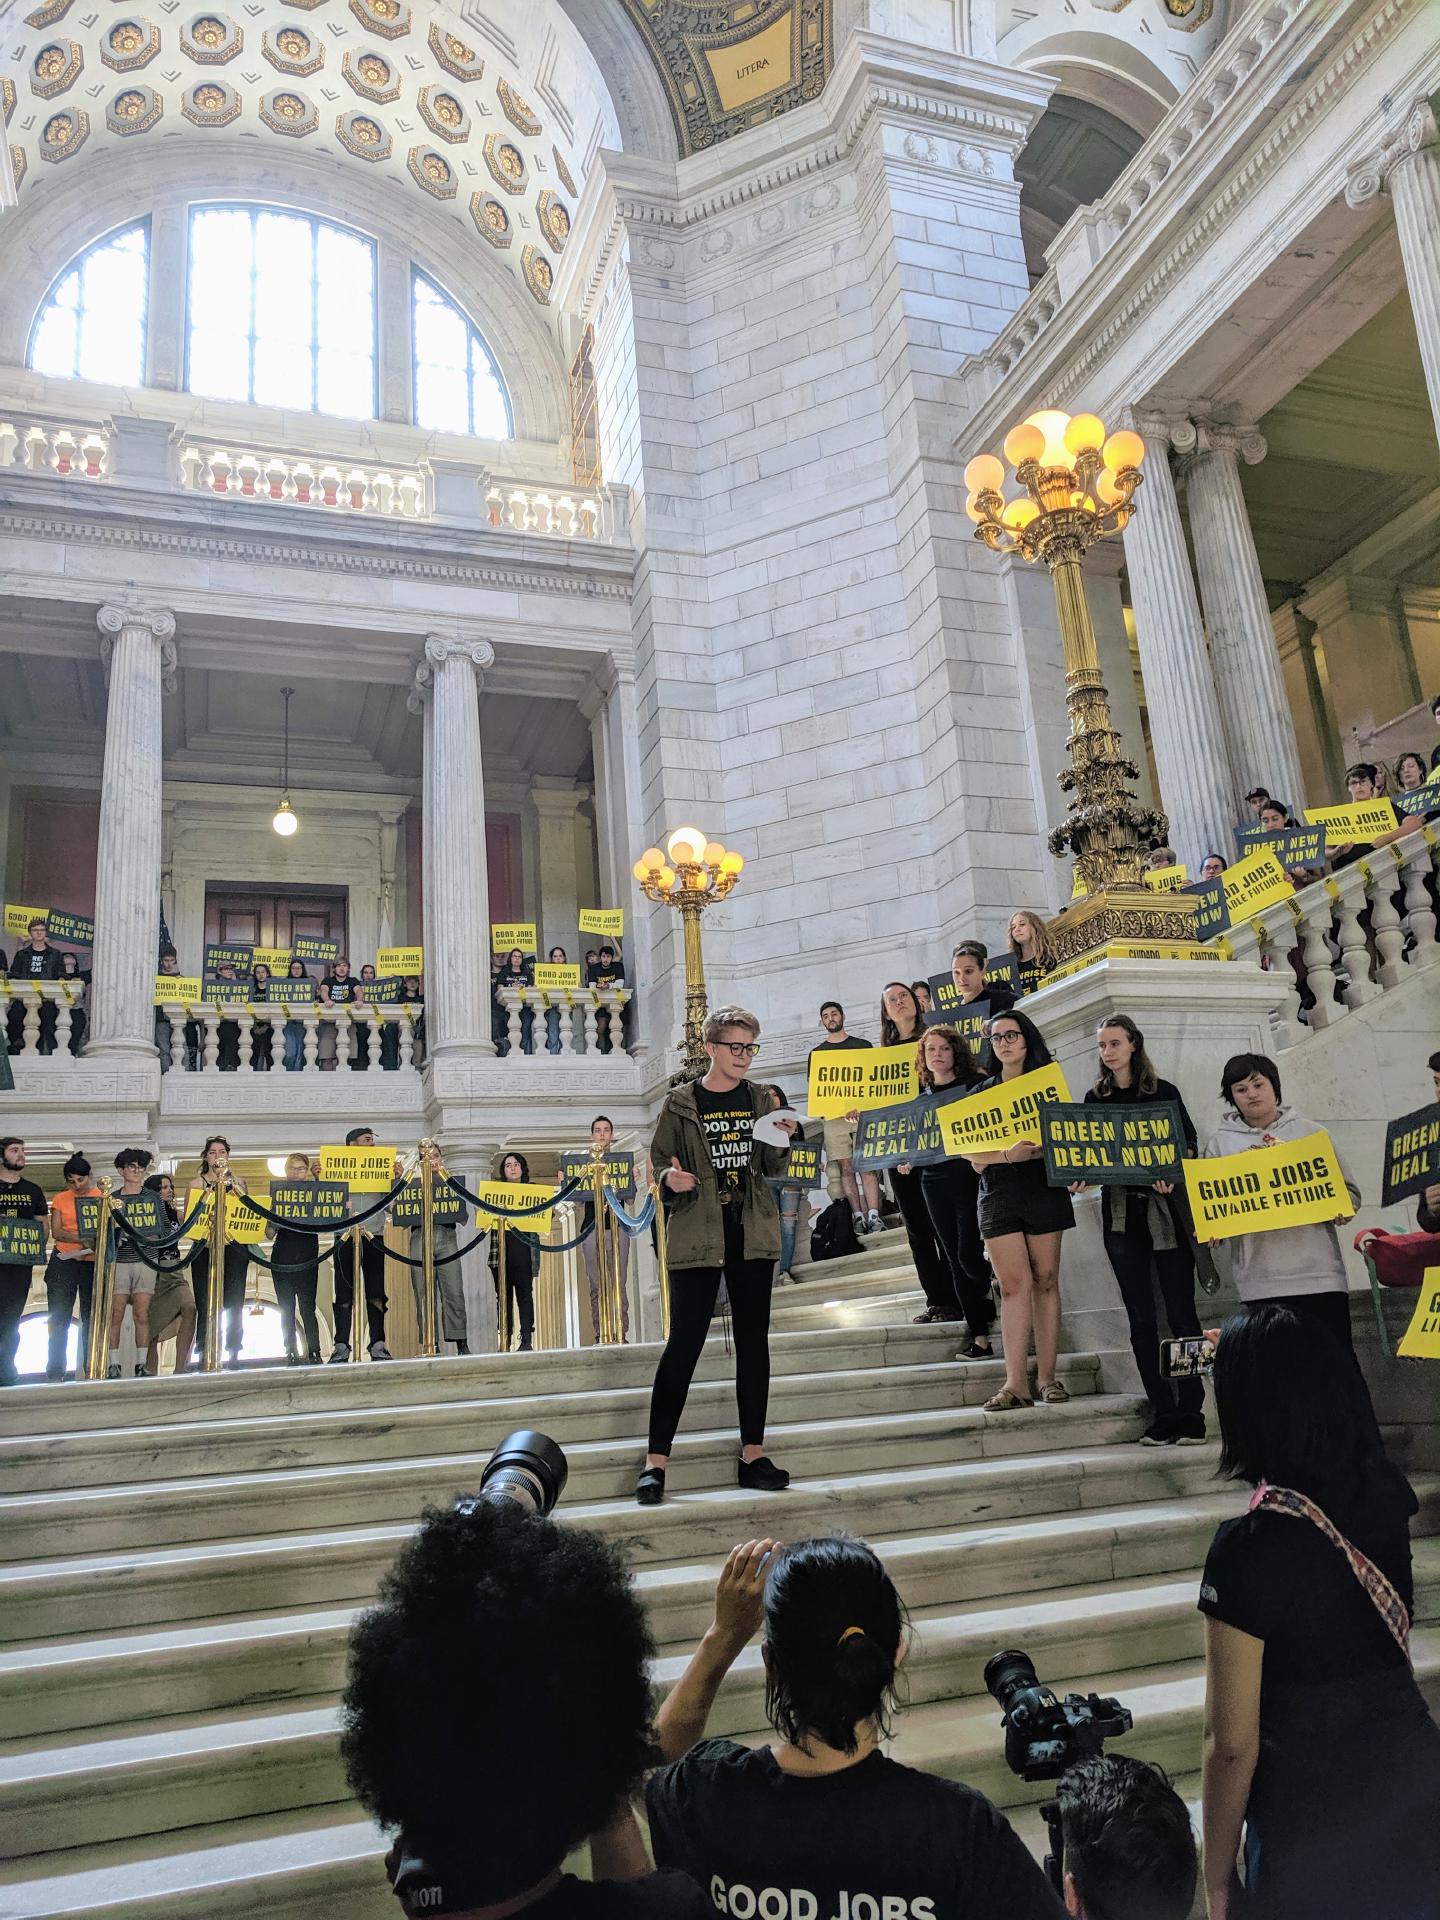 Emily addresses Sunrise Movement activists from the stairs inside the Rhode Island State House rotunda.